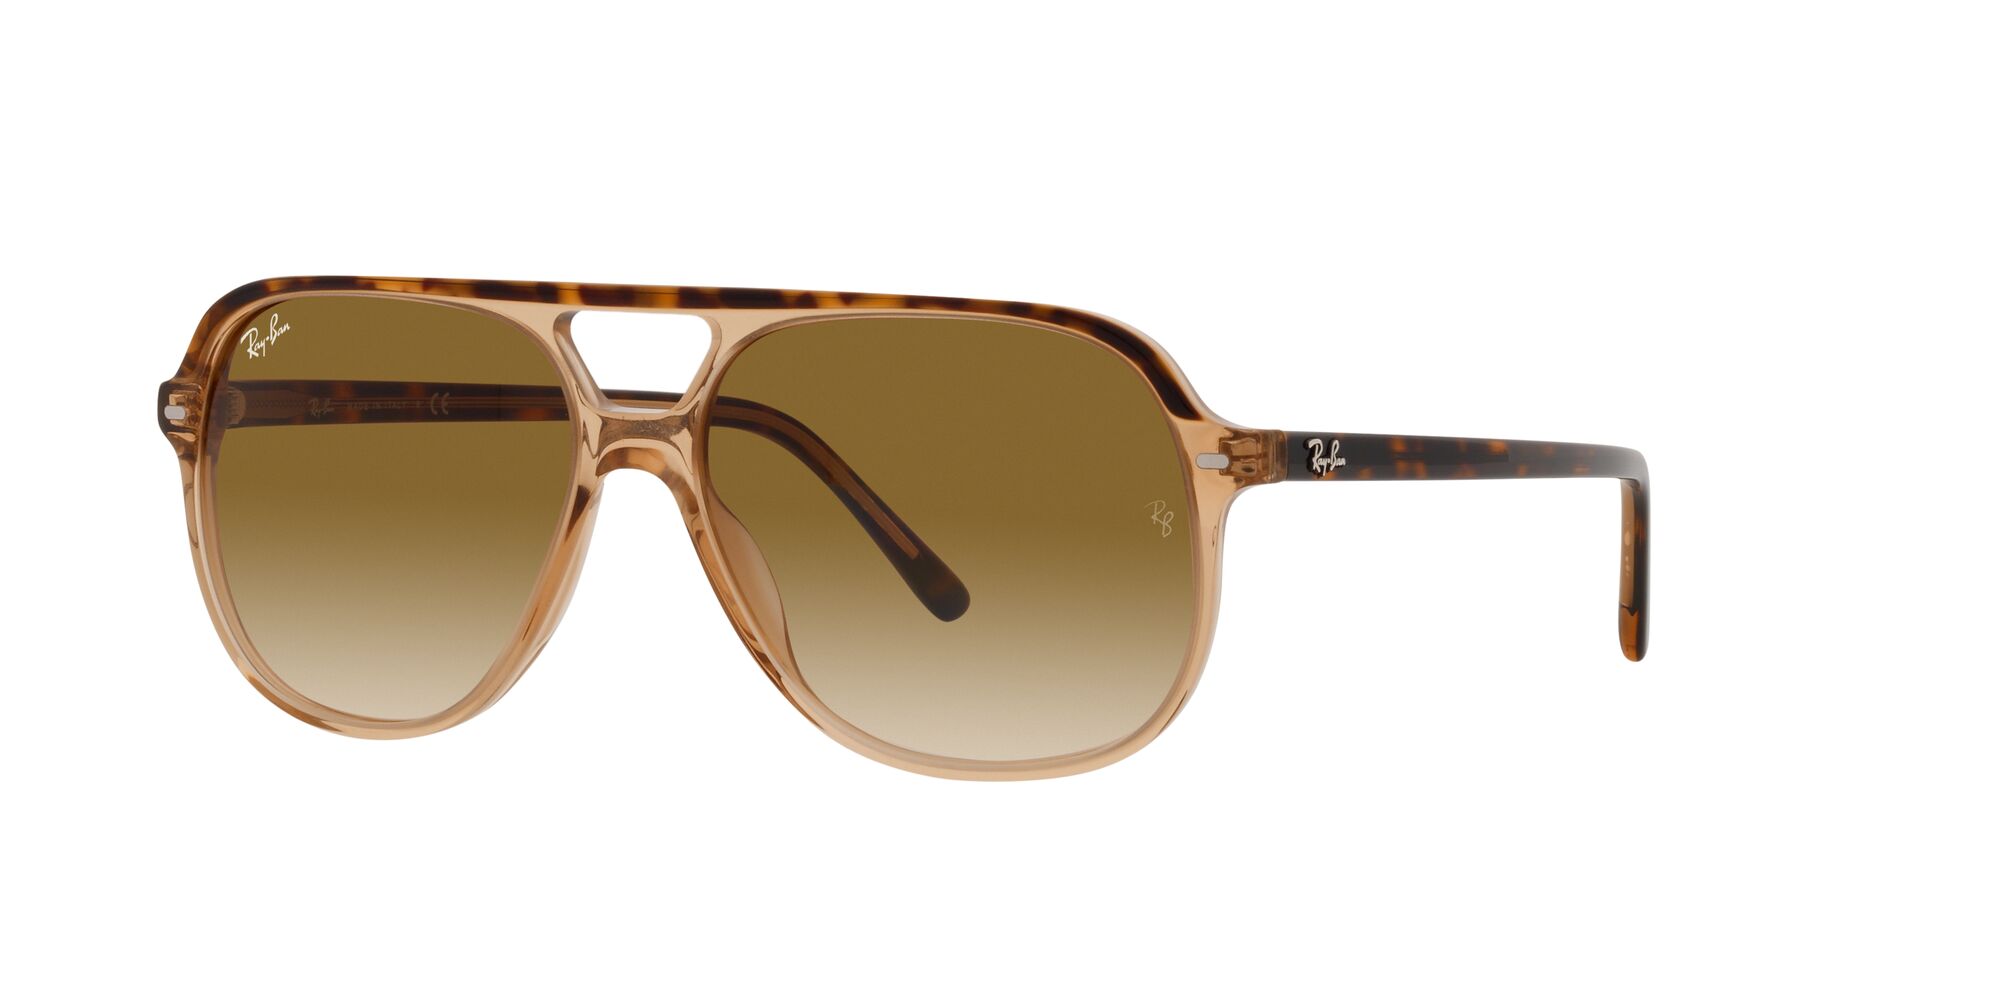 Sunglass Hut® South Africa Online Store | Products | Ray-Ban